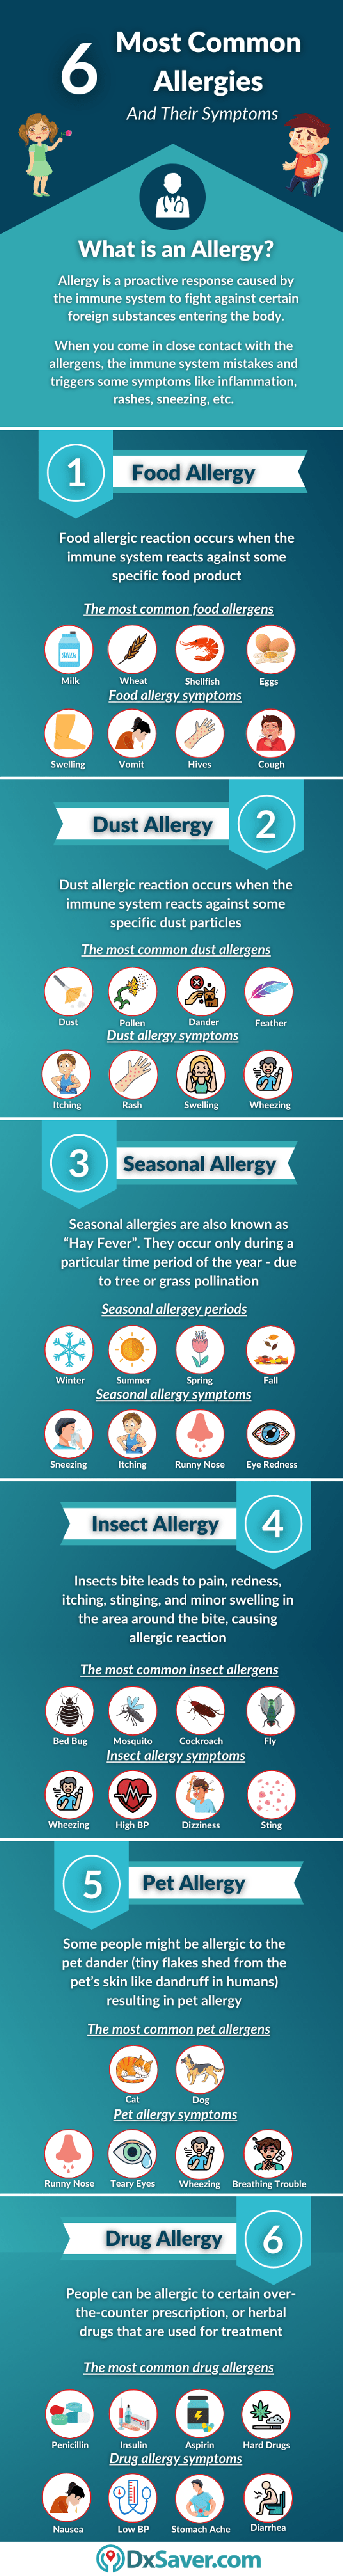 Allergies and Their Symptoms